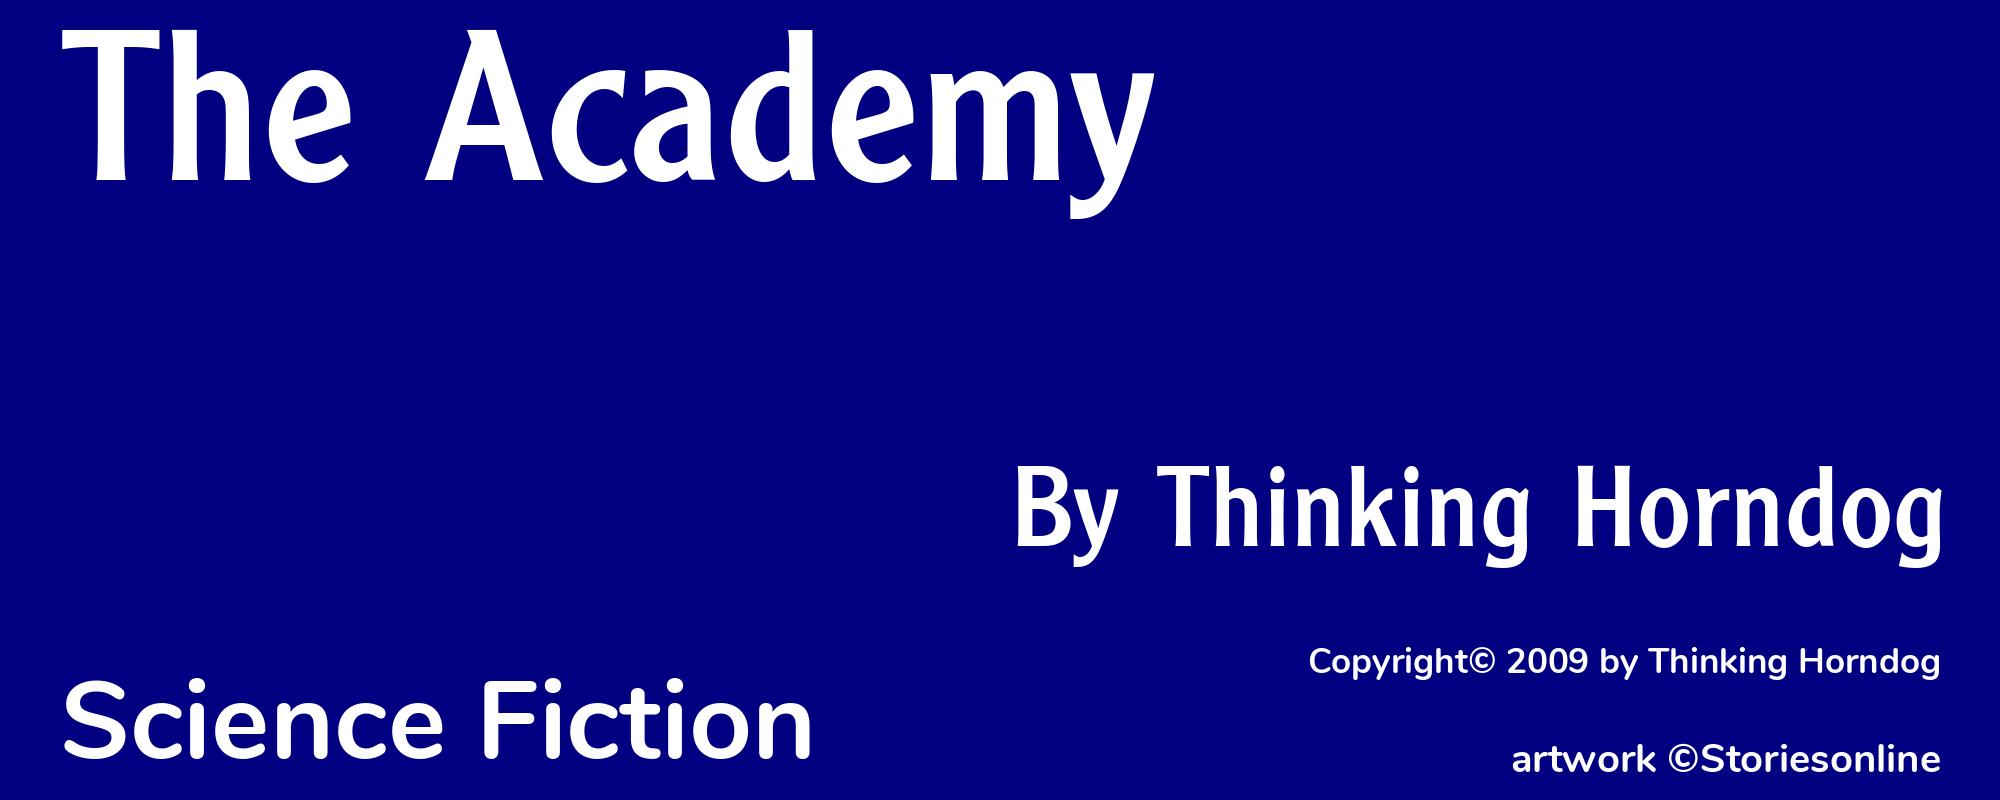 The Academy - Cover